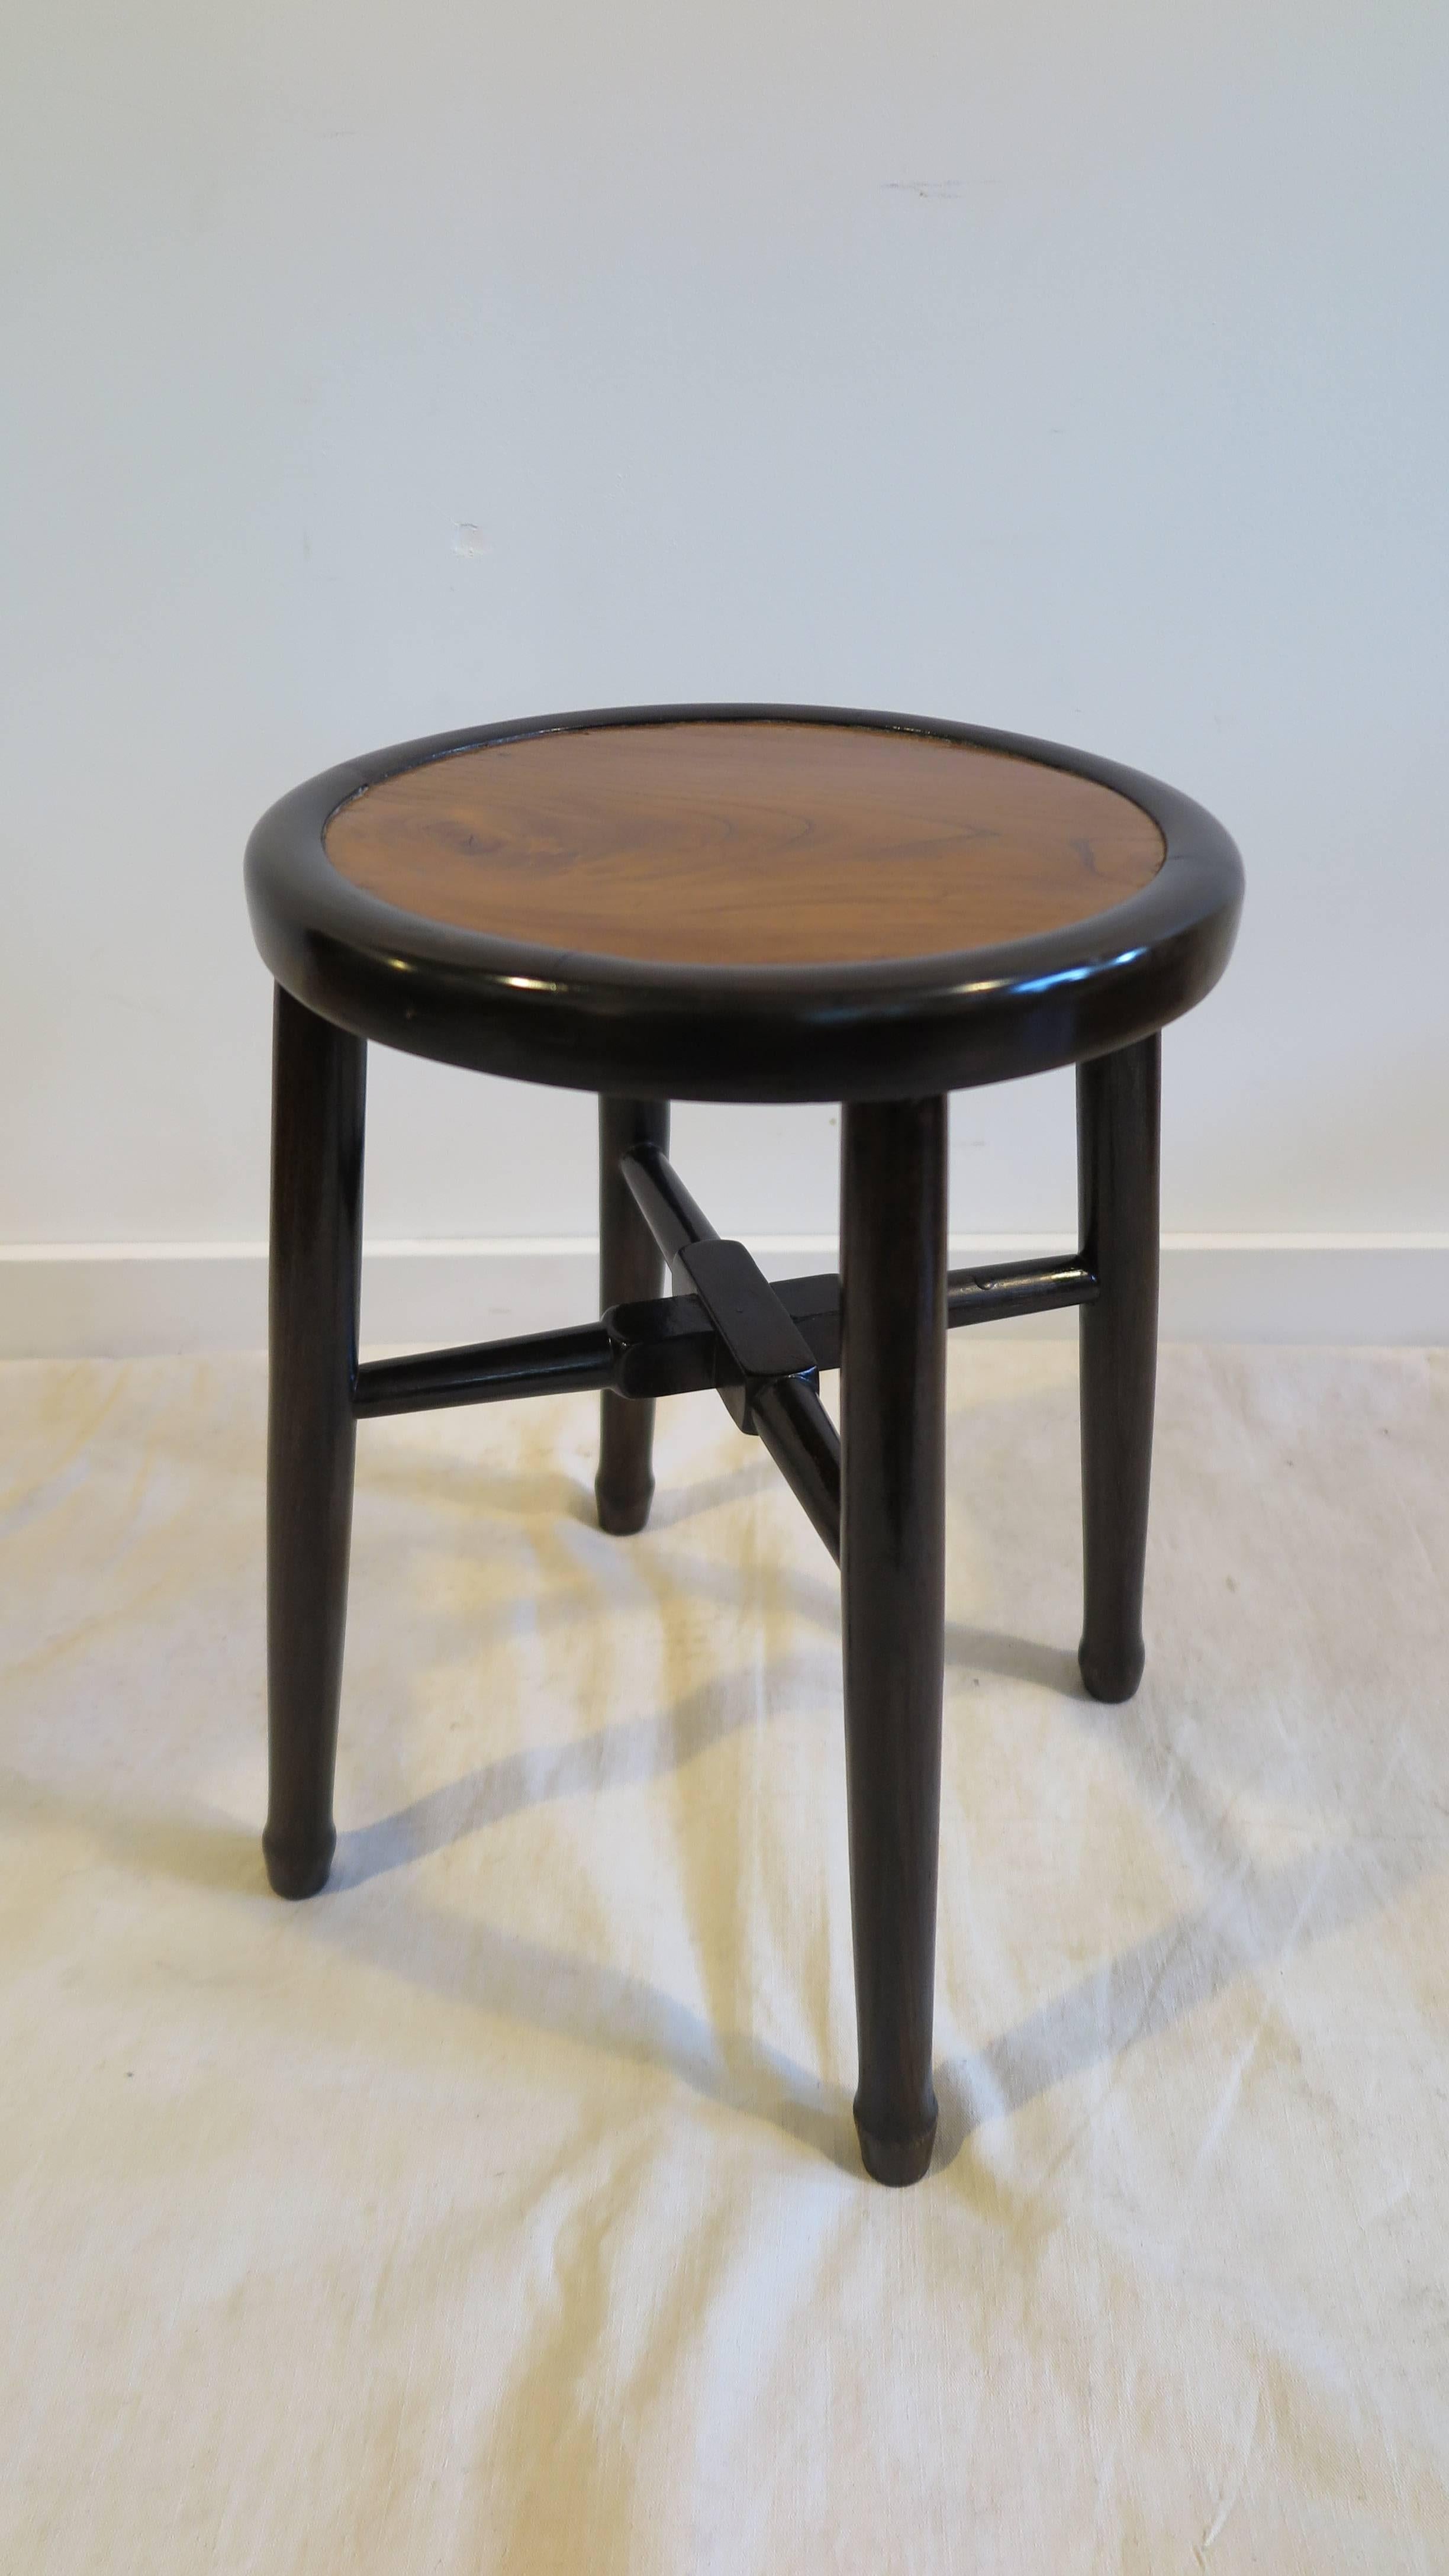 Art Deco round stool side tables of Elm wood.  We have two Stools for sale.  Priced individually in very good condition. 
Great for additional seating and or side tables.  
